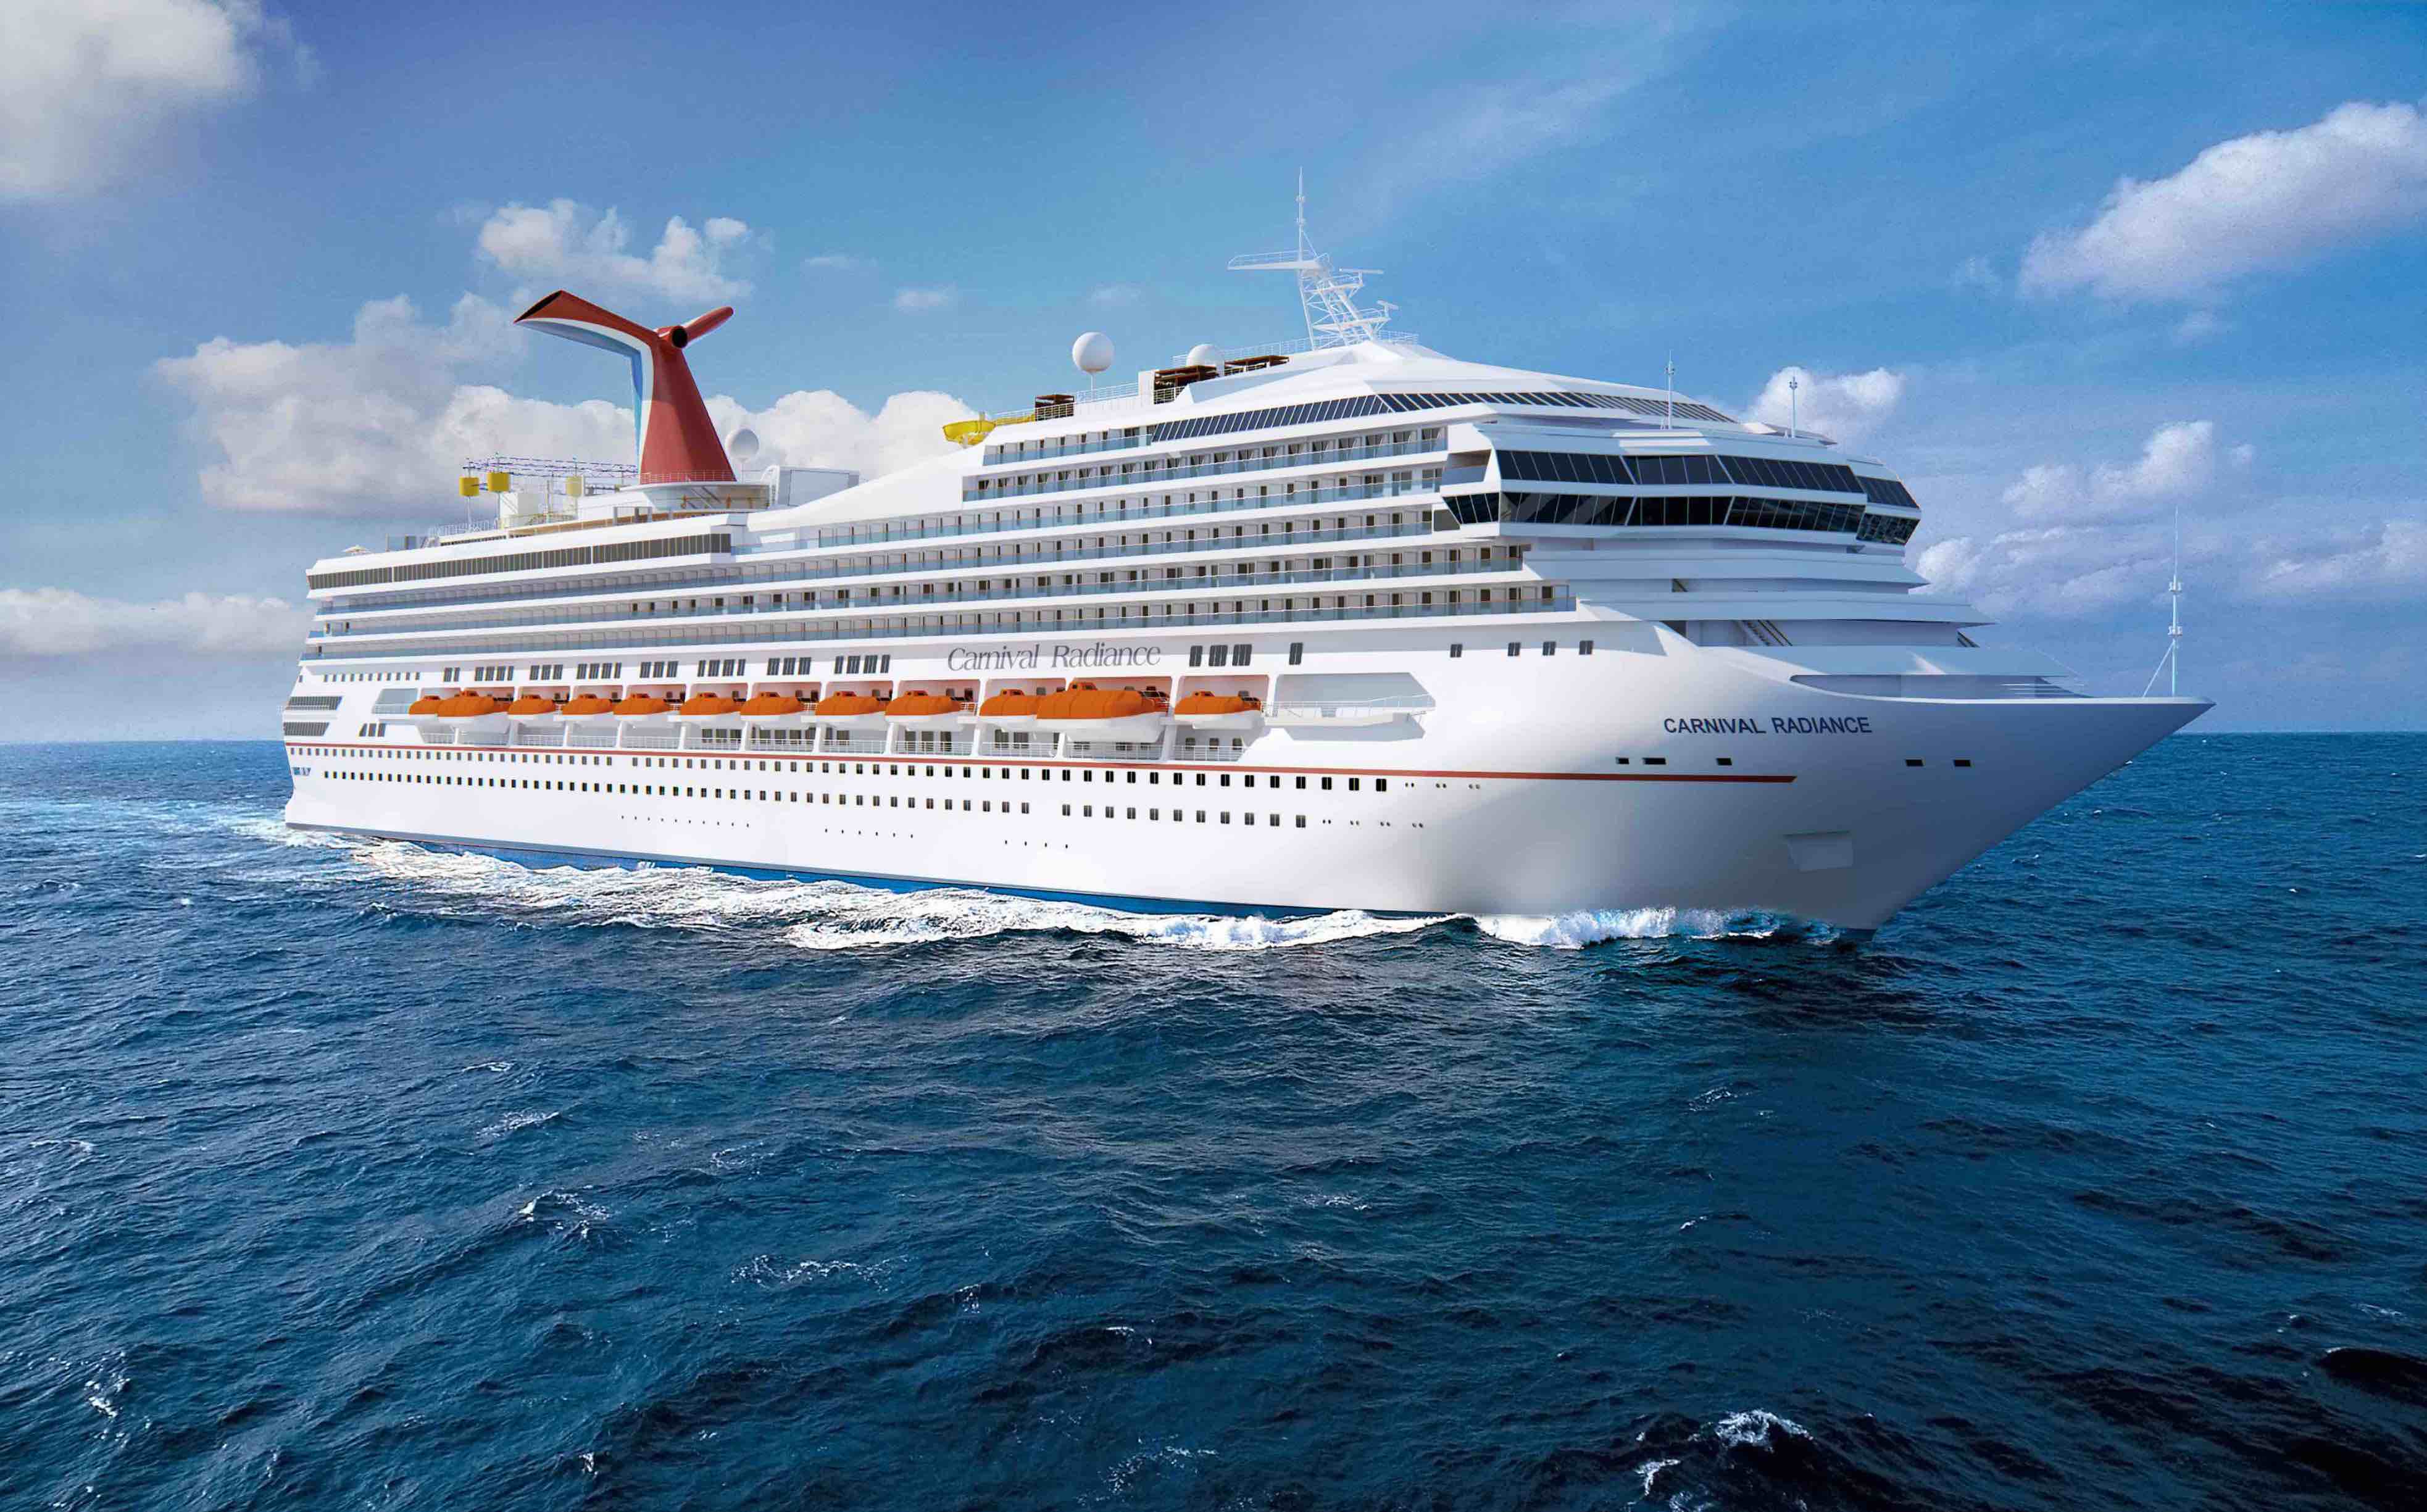 Carnival Radiance will have her refurbishment delayed